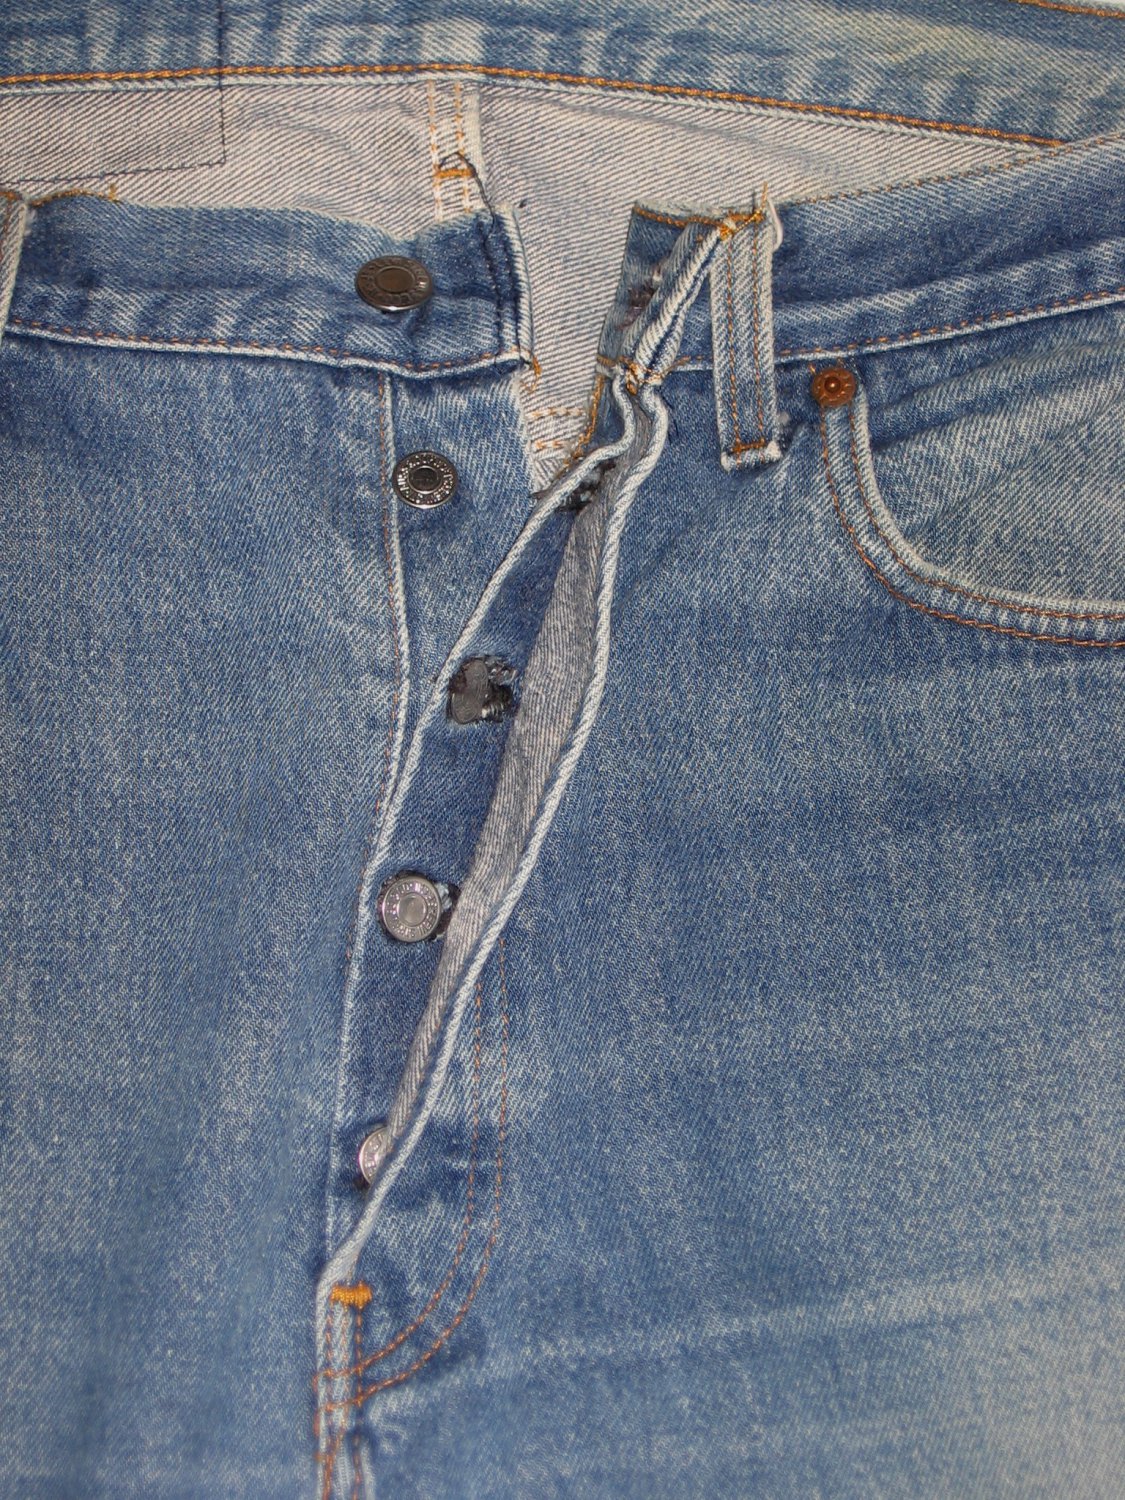 Vintage Levis Strauss Button Fly 501 Blue Jeans Pants Size 38 x 30 Red Tab